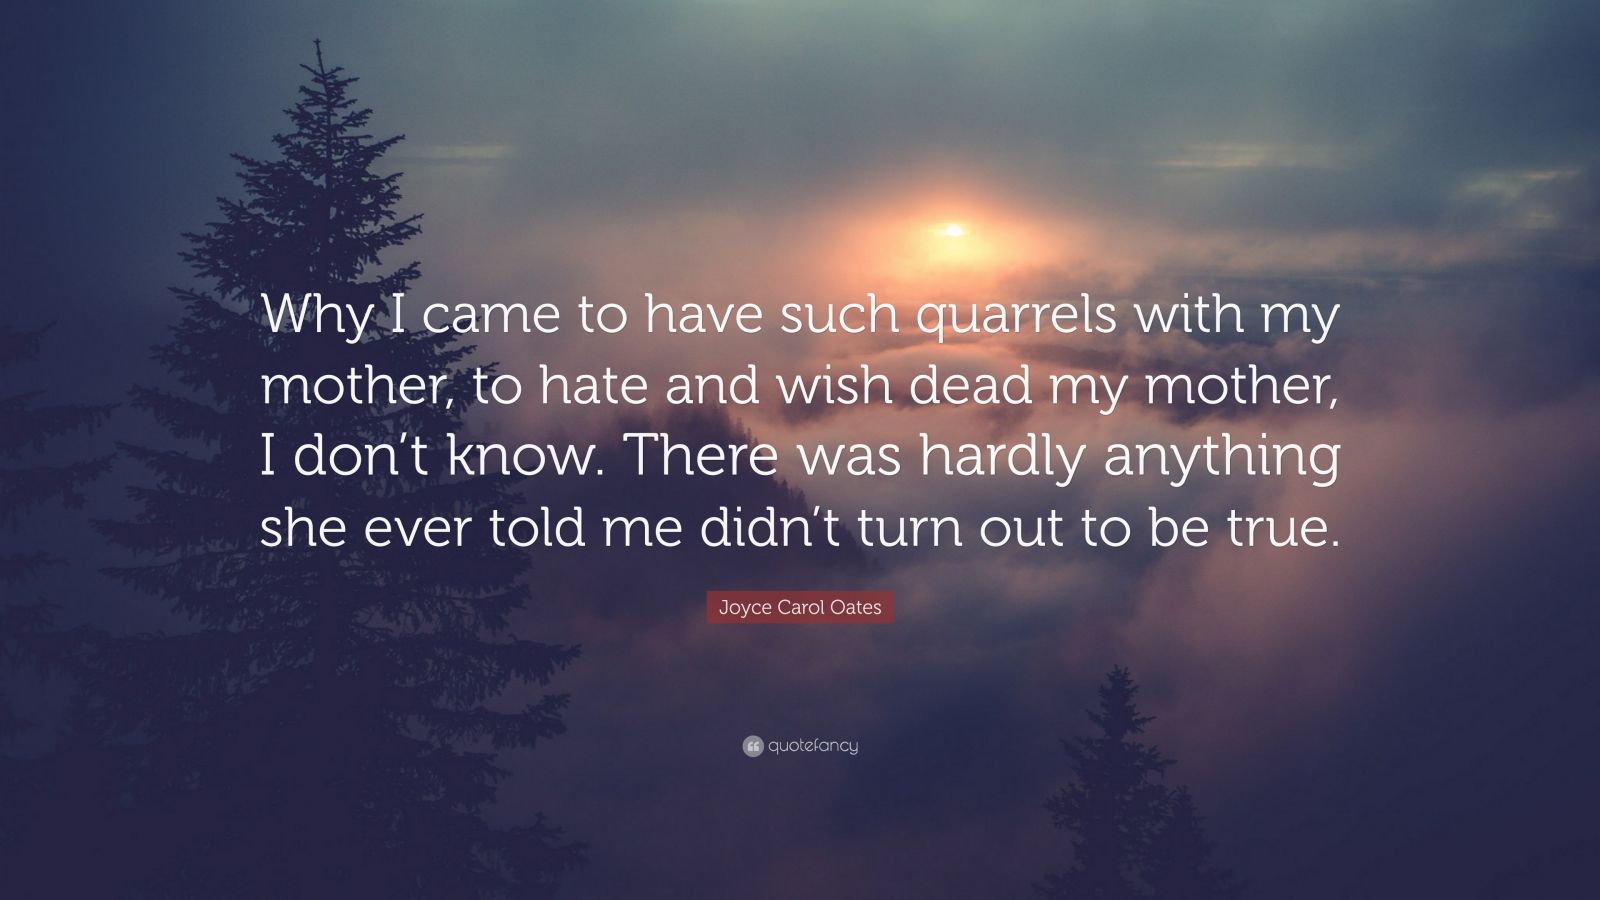 Joyce Carol Oates Quote: “Why I came to have such quarrels with my ...